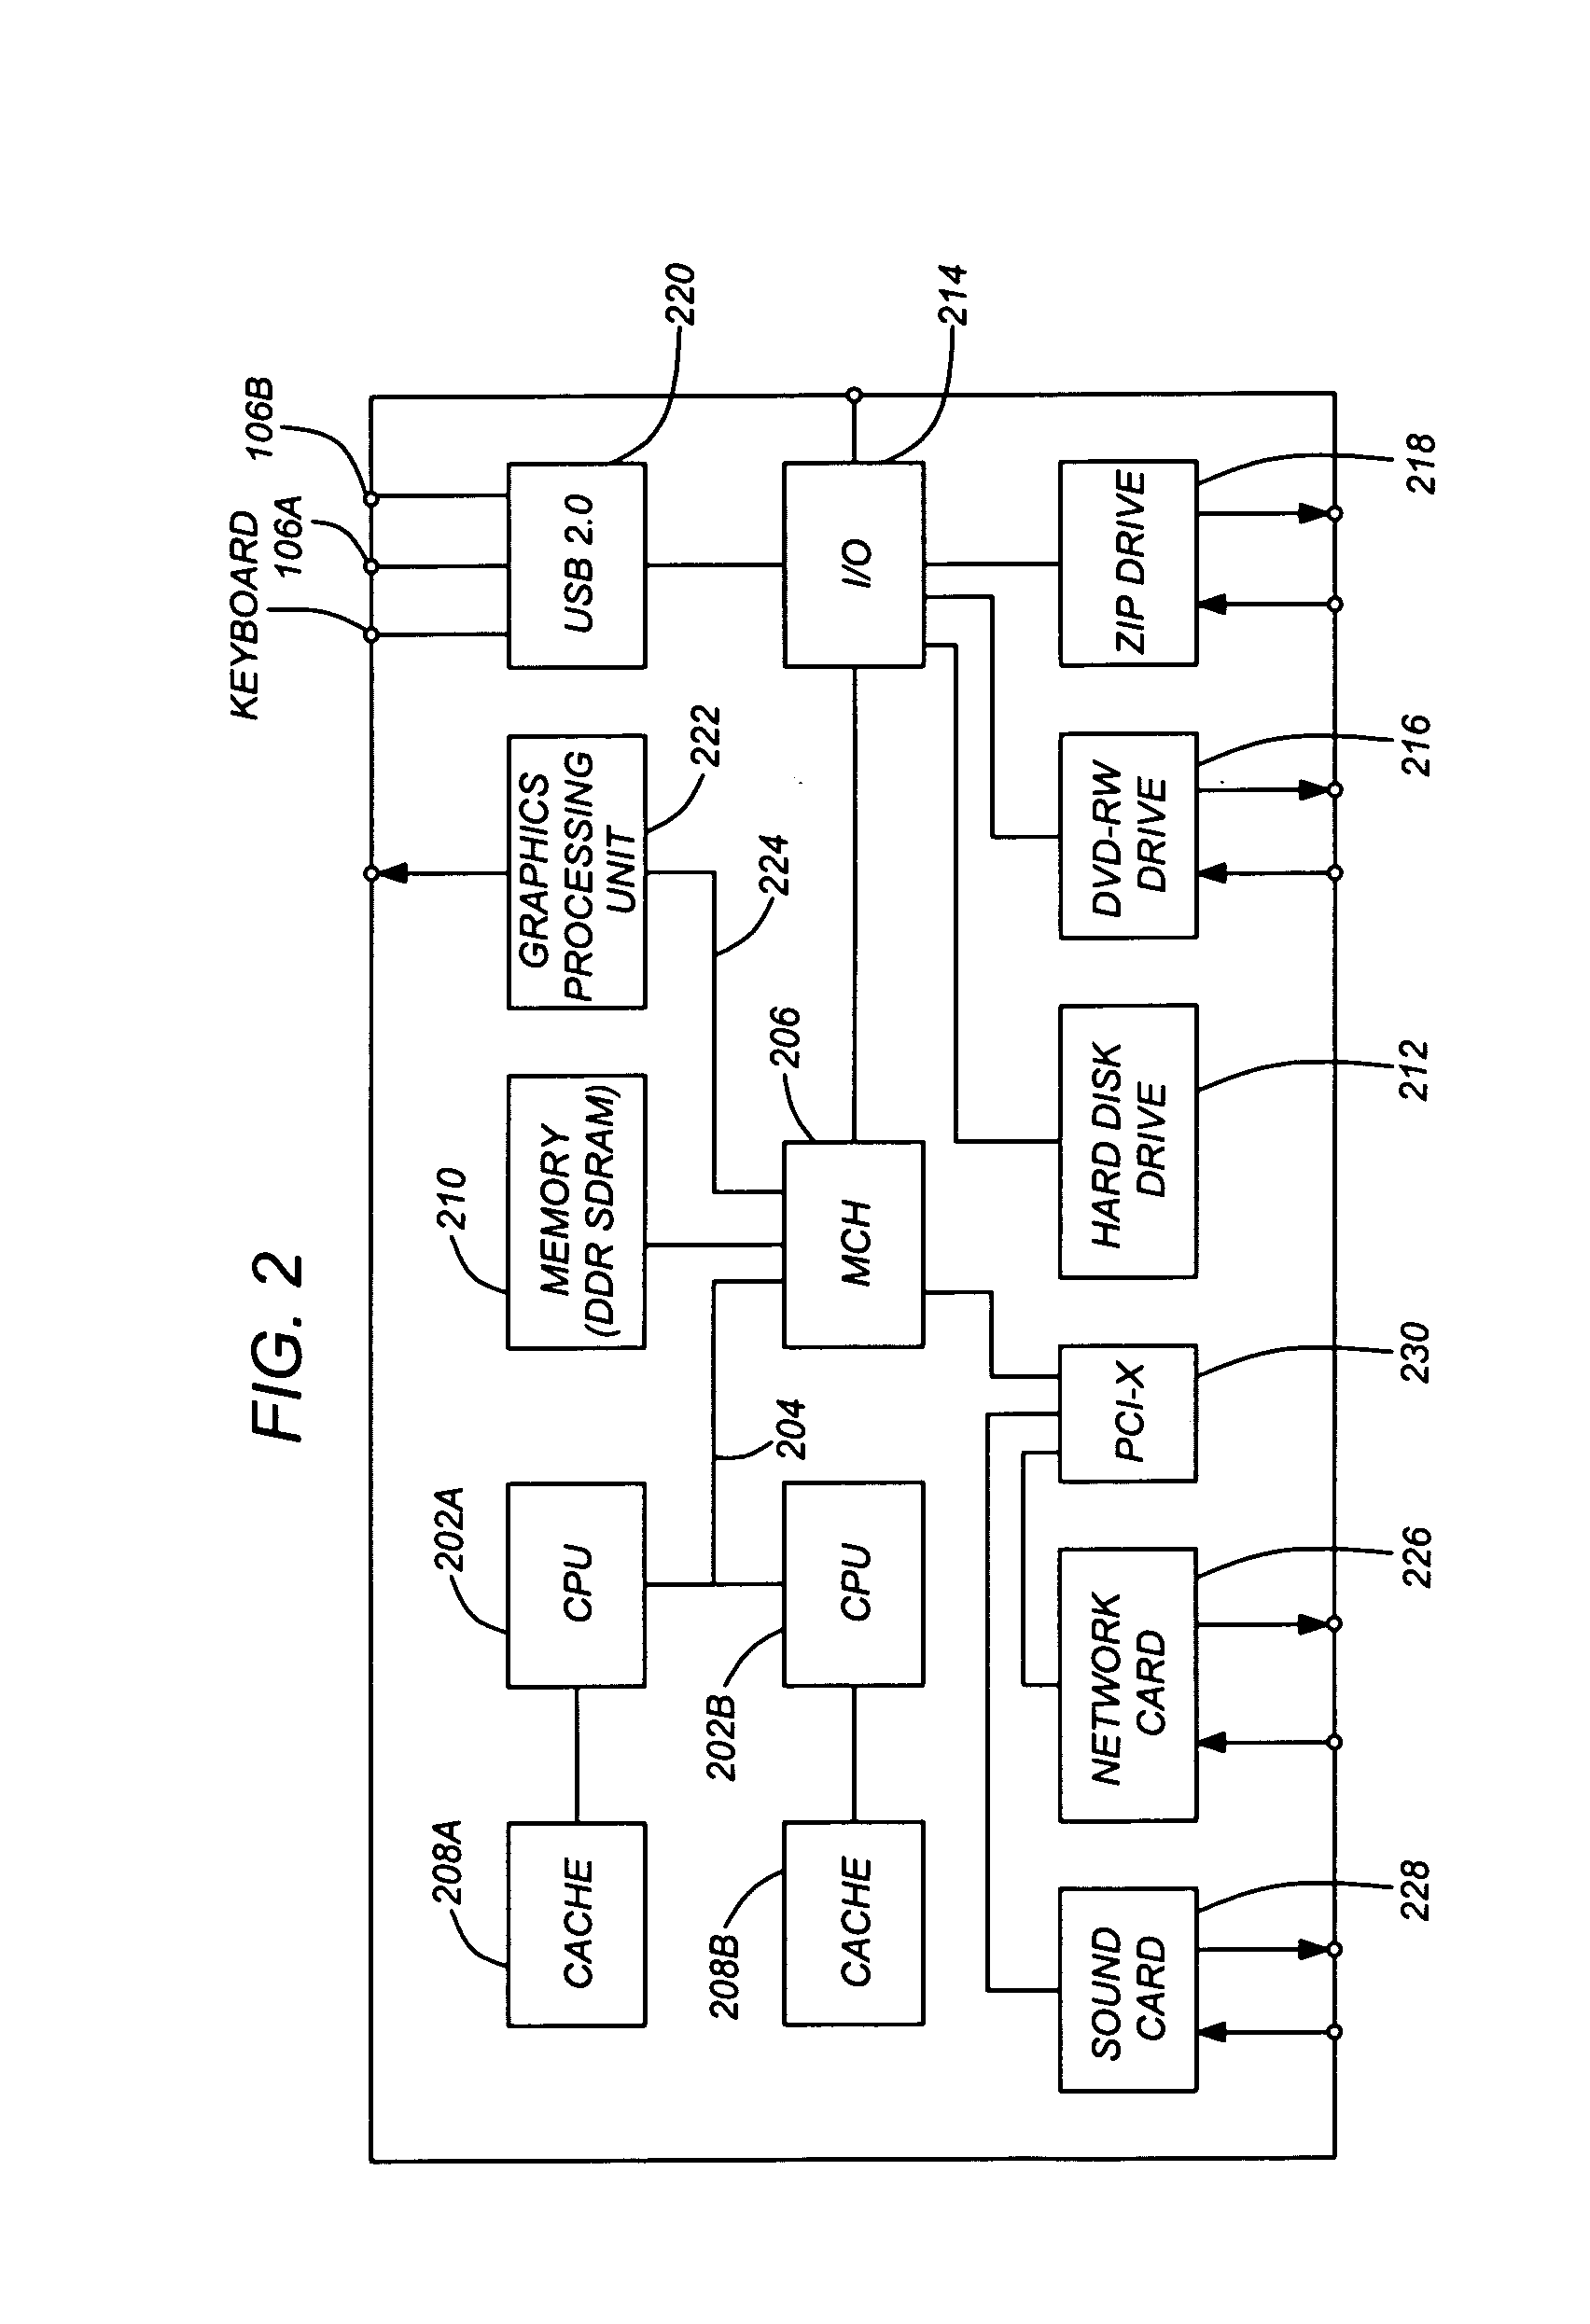 Method for rendering global illumination on a graphics processing unit